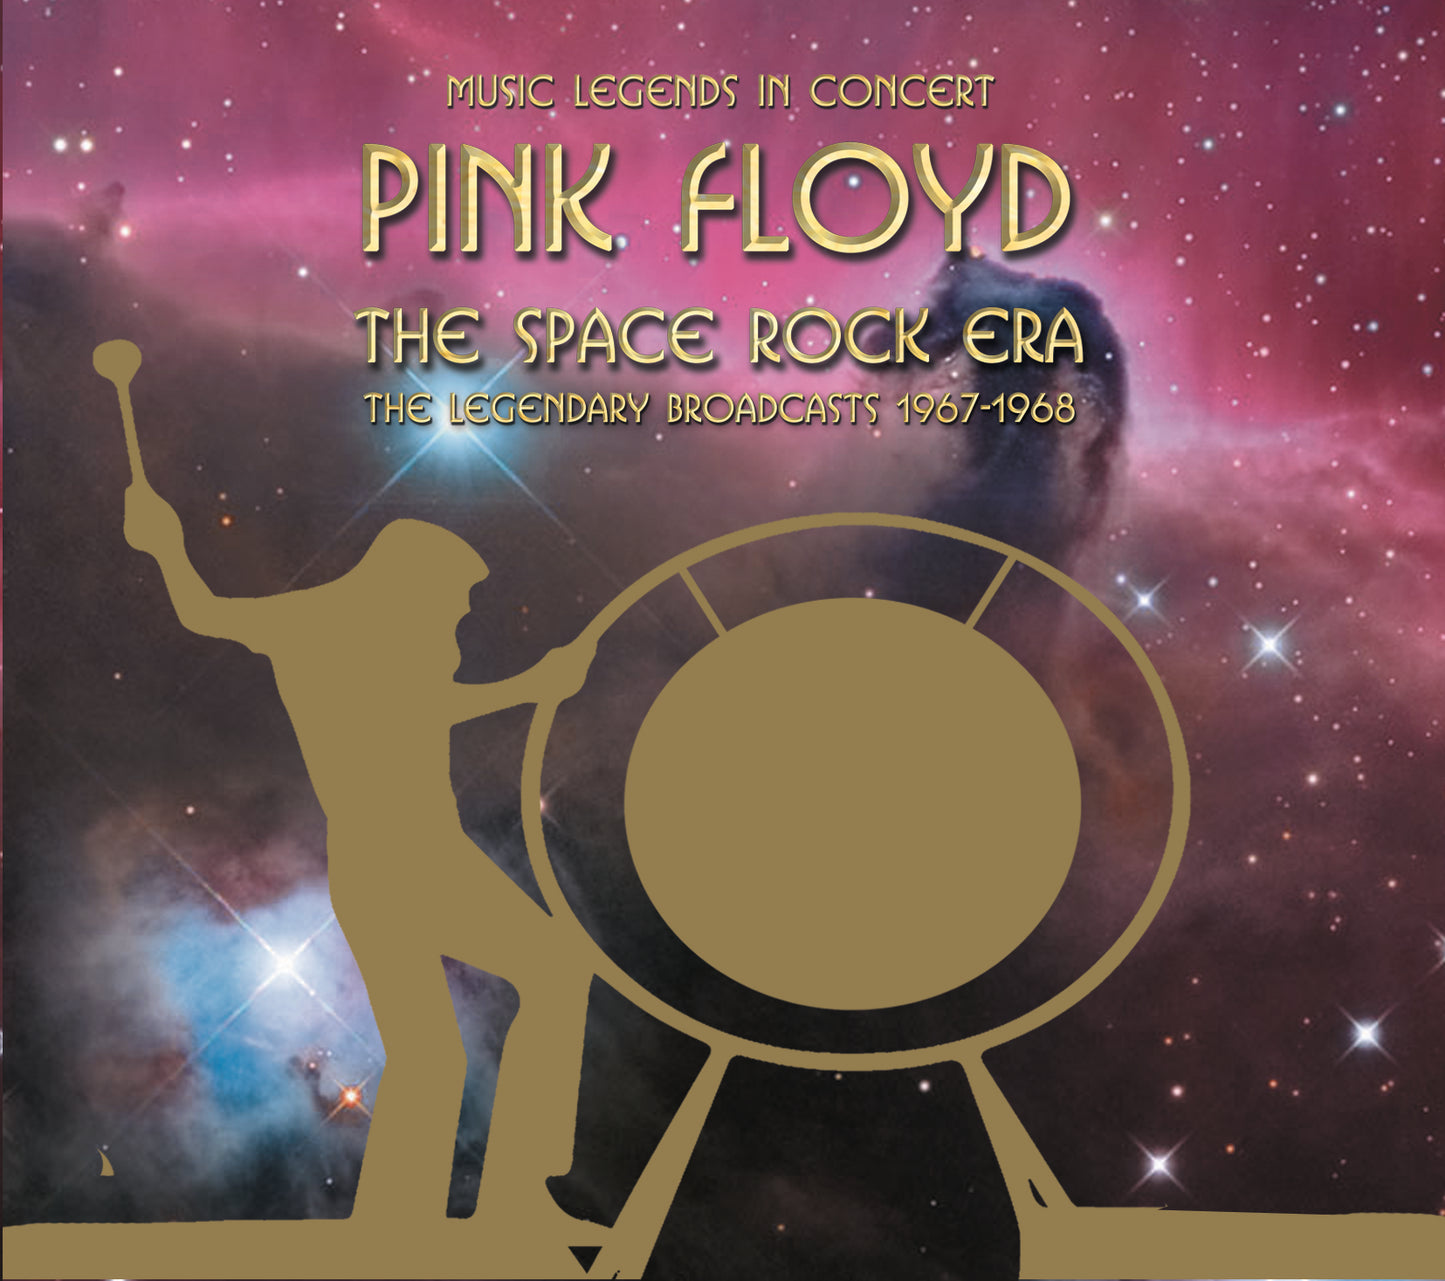 Pink Floyd - The Space Rock Era - The Legendary Broadcasts 1967-1968 (CD)